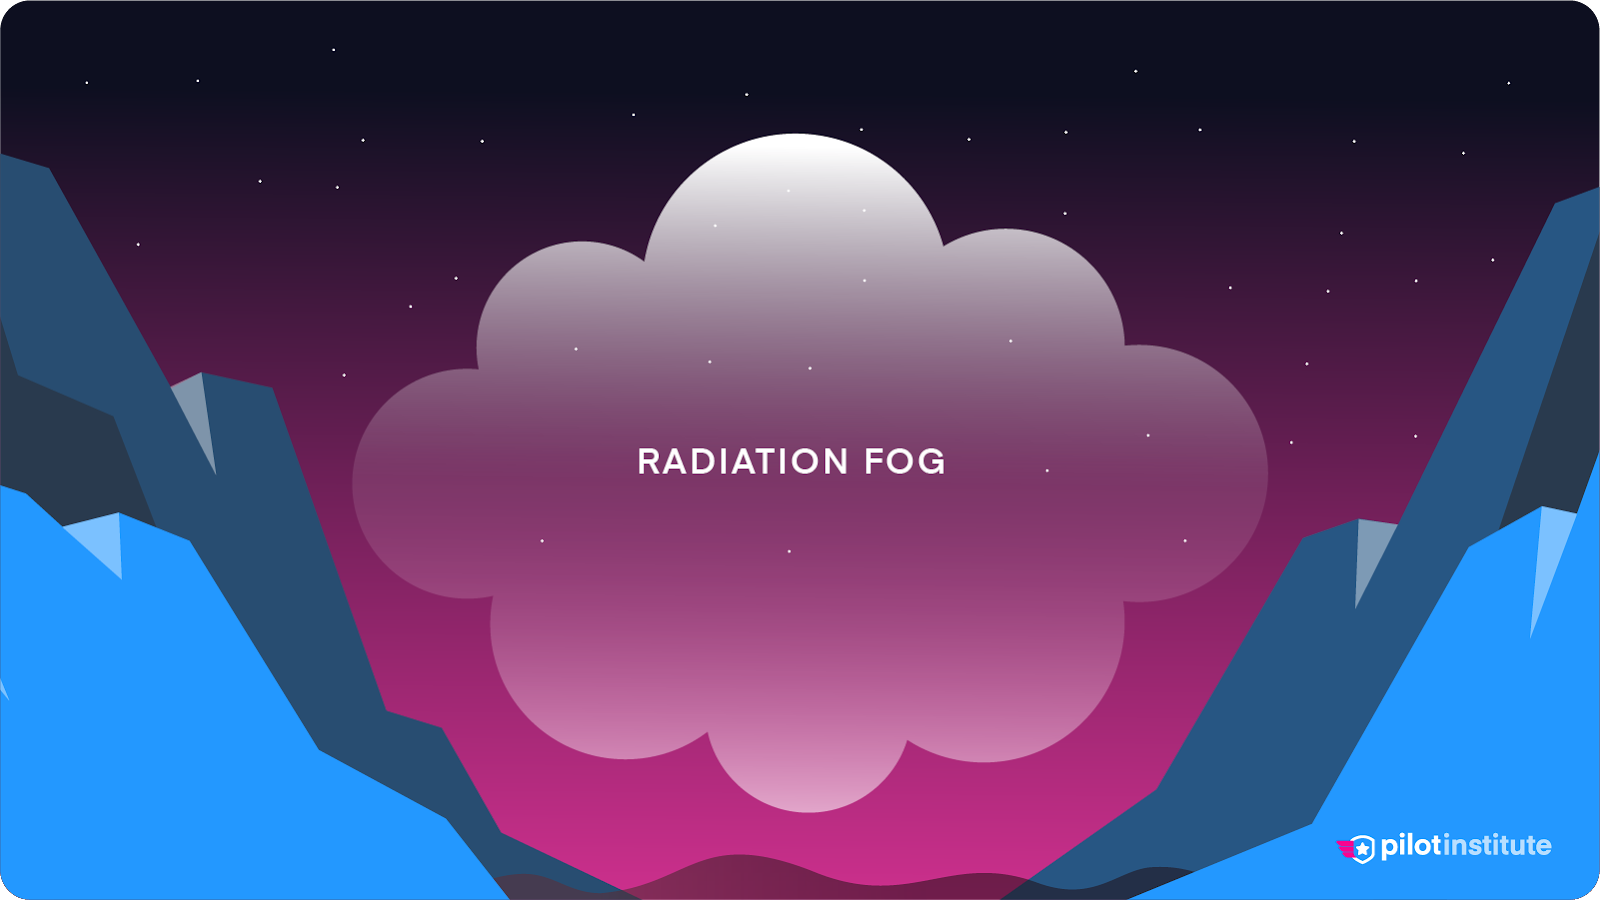 A diagram depicting radiation fog in a valley.